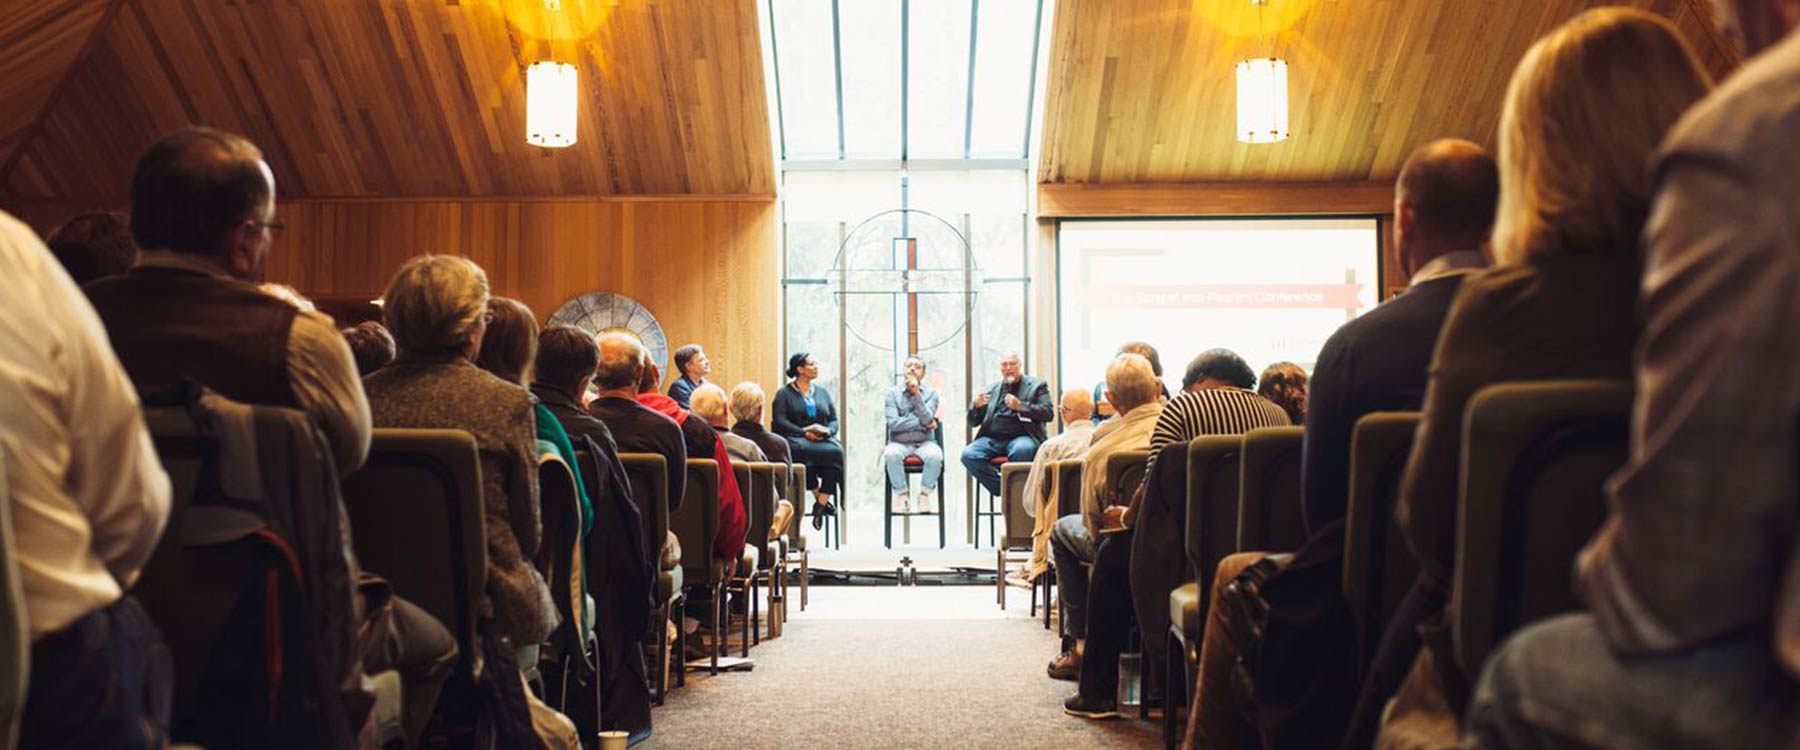 A panel of speakers sits at the front of the university chapel. The rows of seats are filled with listeners.